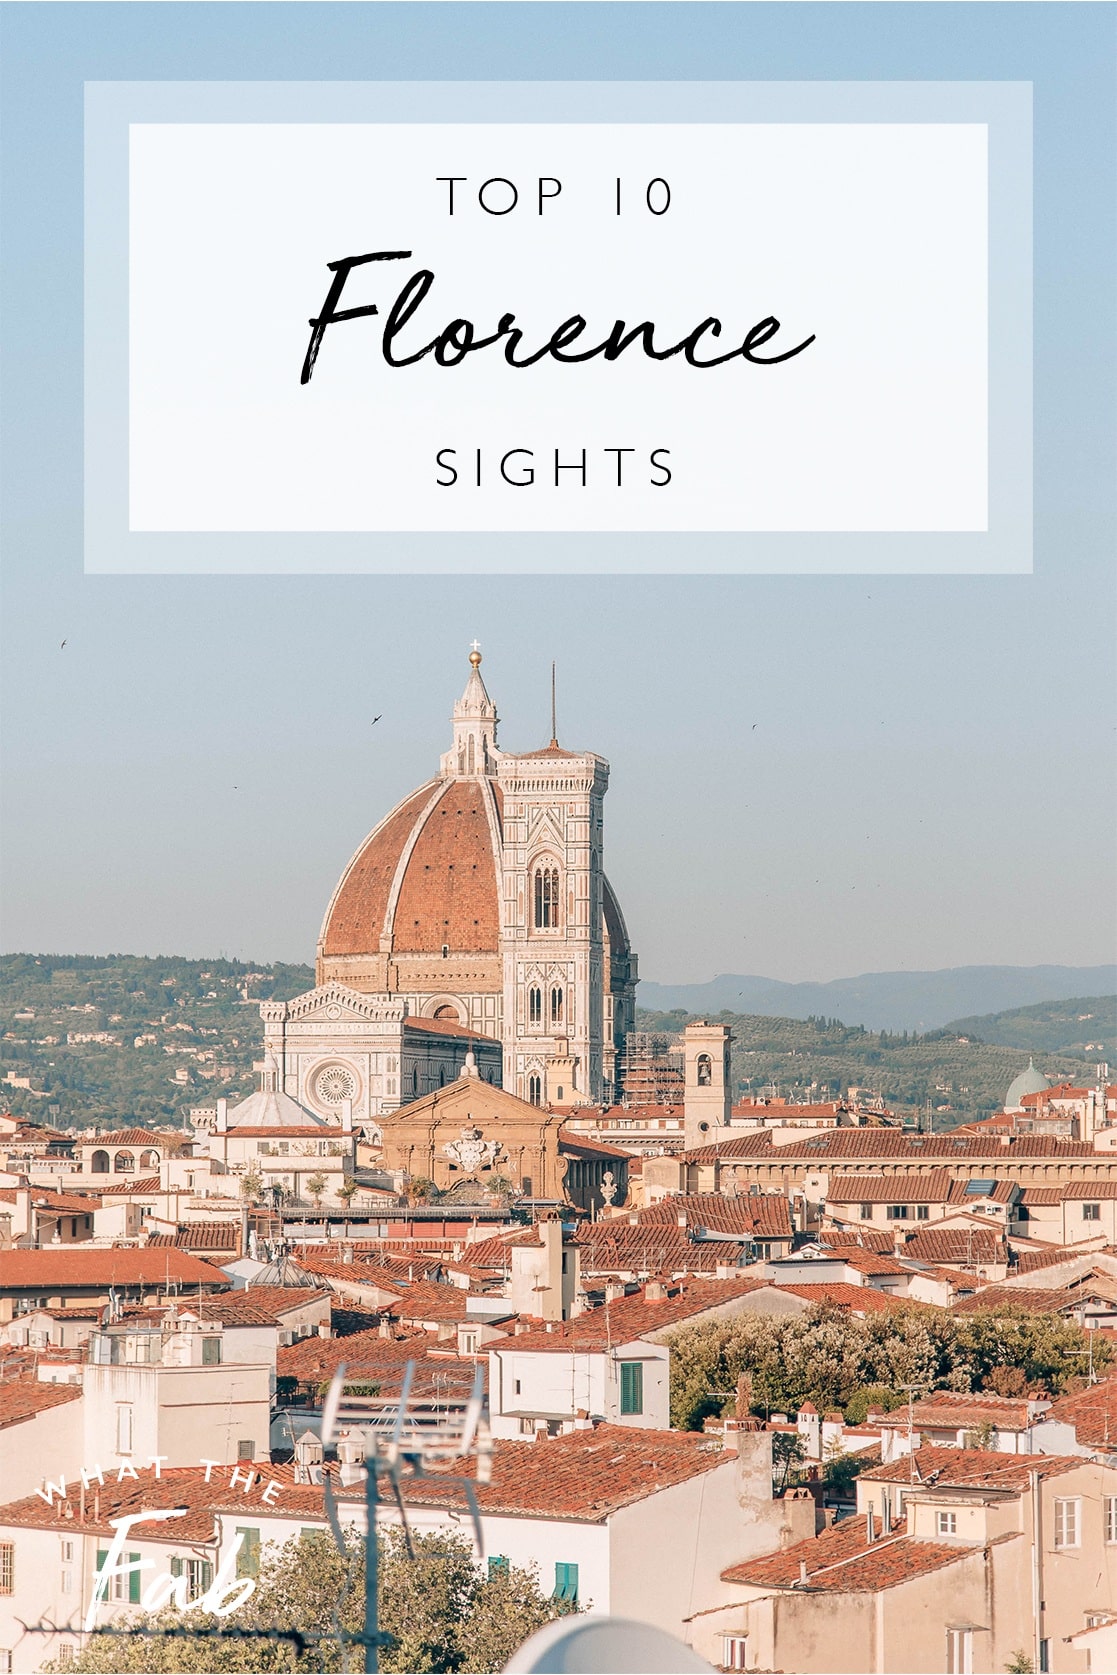 Top 10 Florence Sights, by travel blogger What The Fab